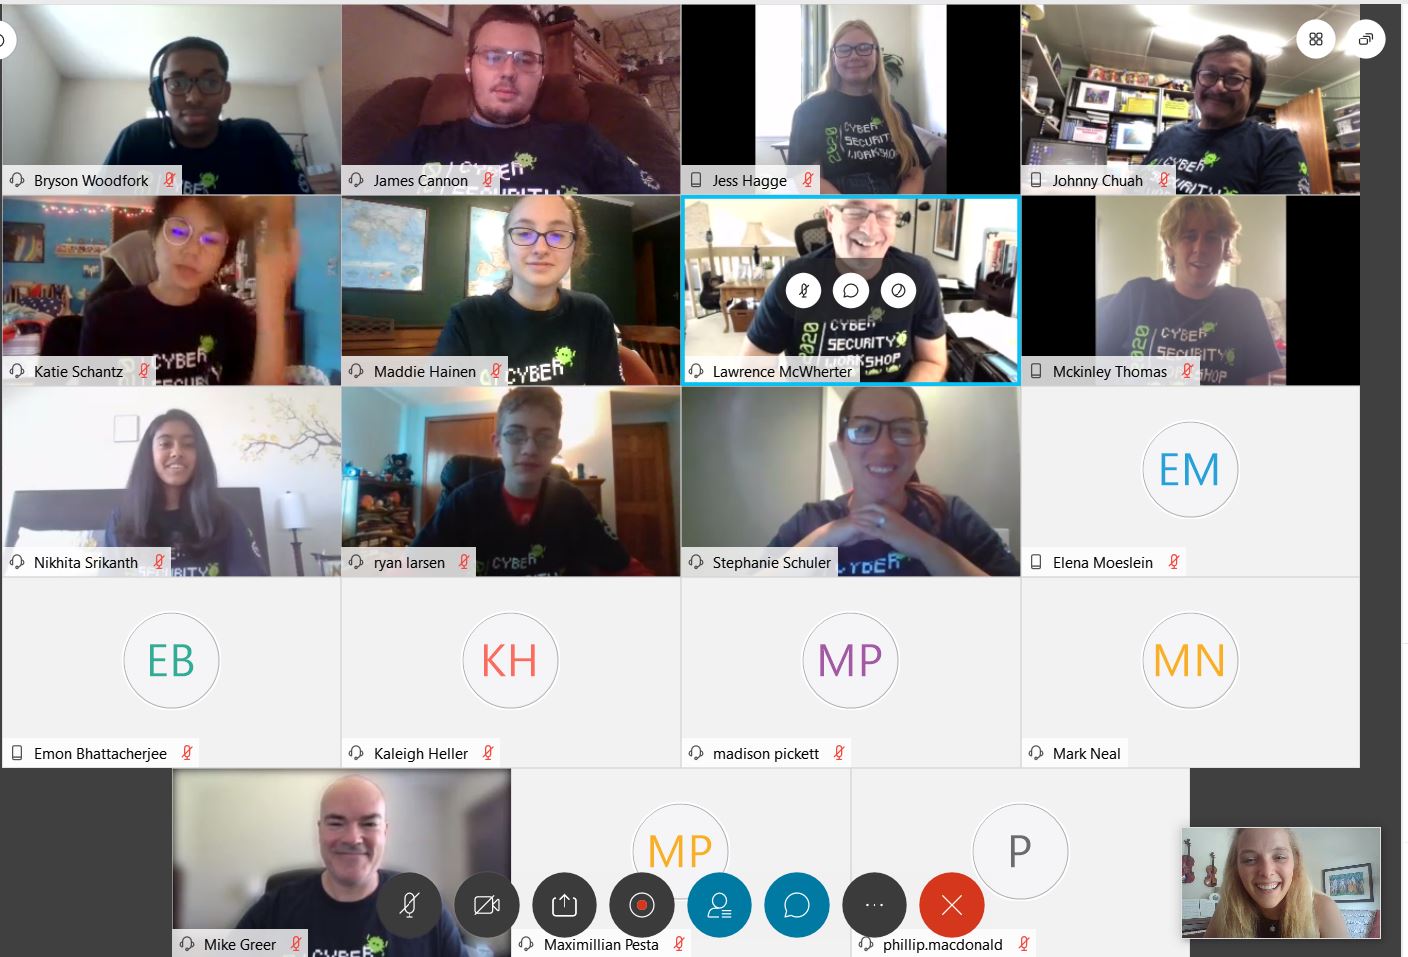 A screen shot of the participants in the virtual event.